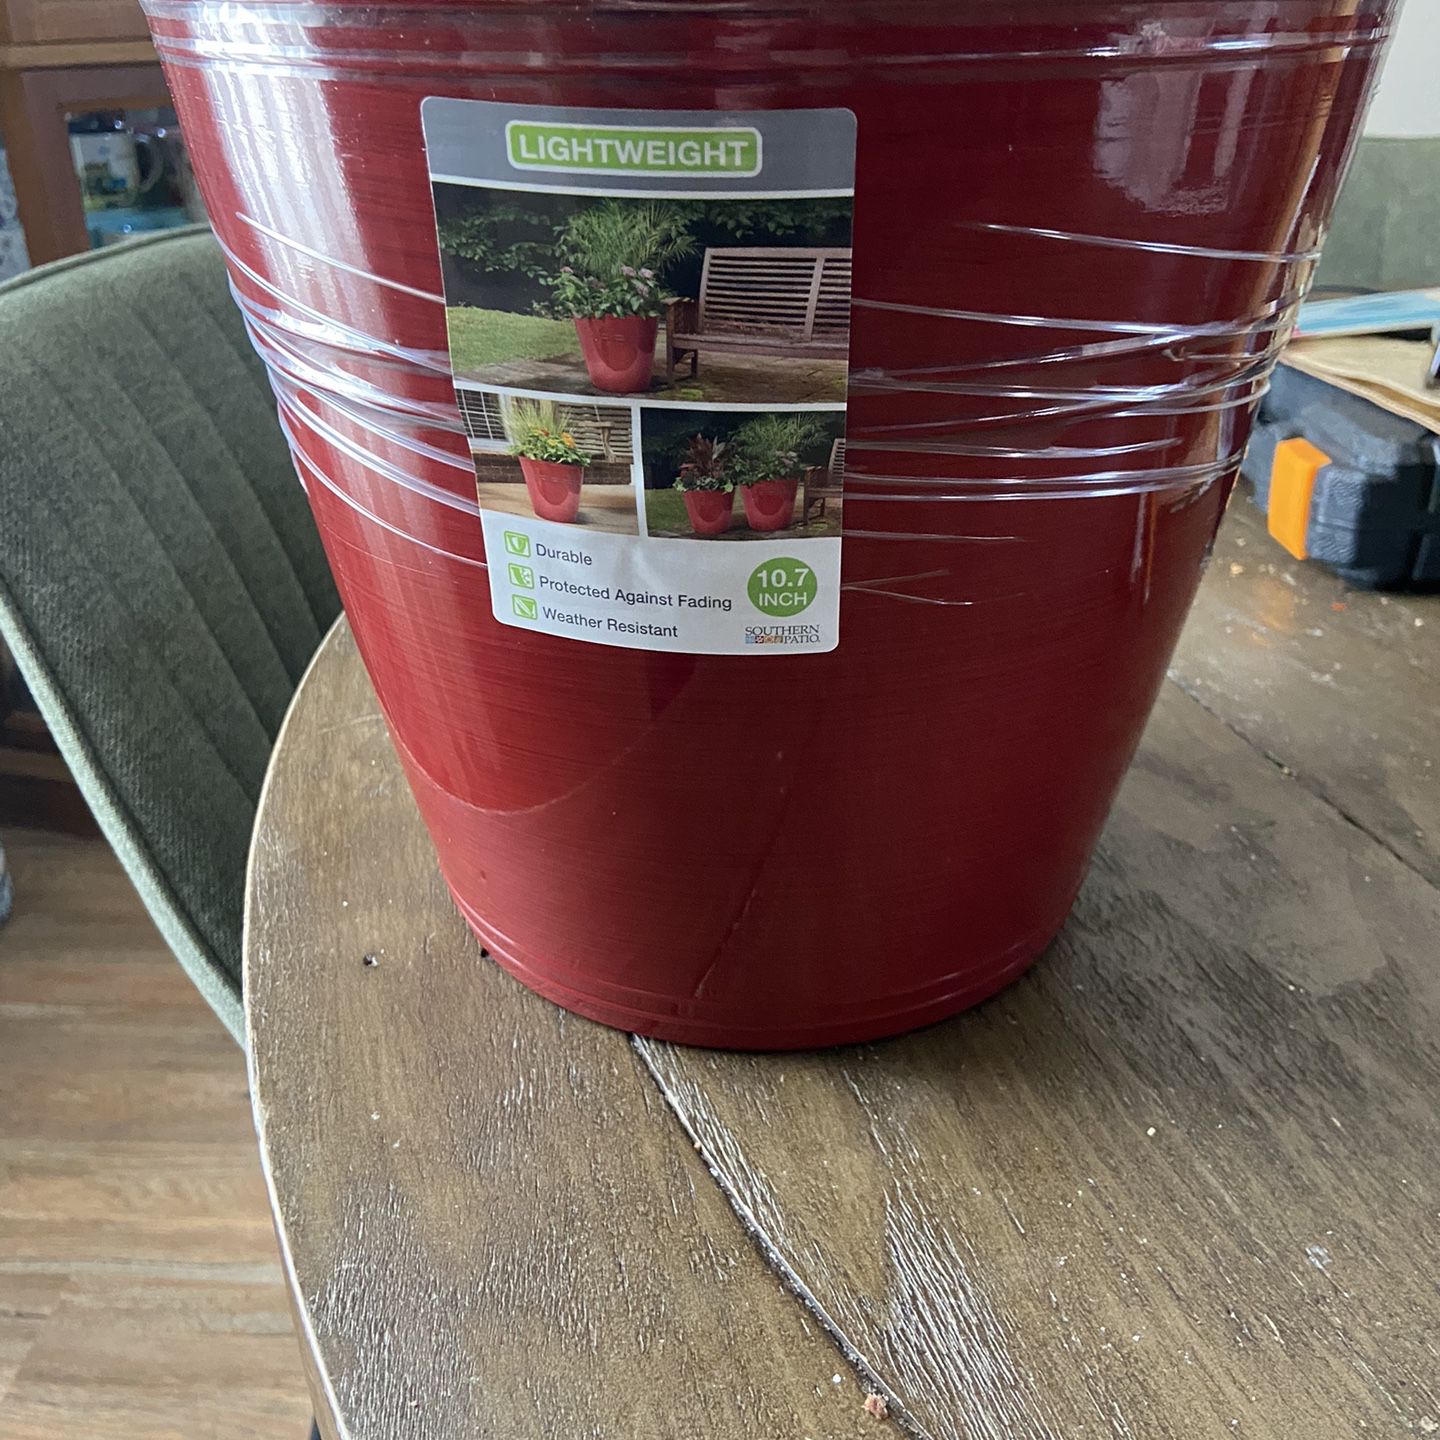 400 New planters / pots available at $3 each.